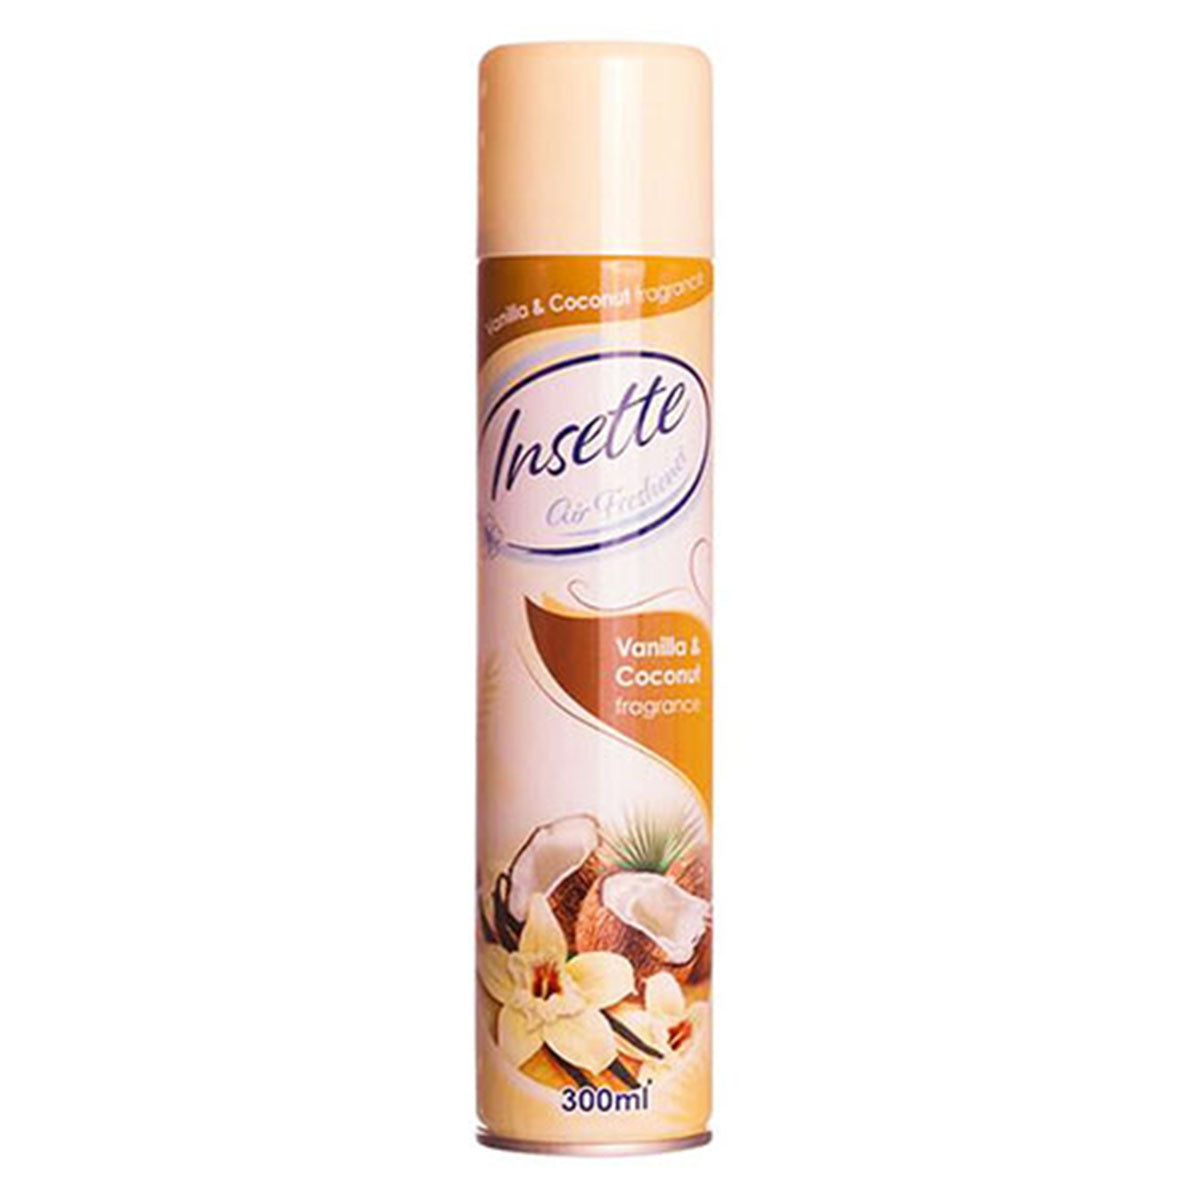 A can of Insette - Air Freshener Vanilla & Coconut - 300ml on a white background.